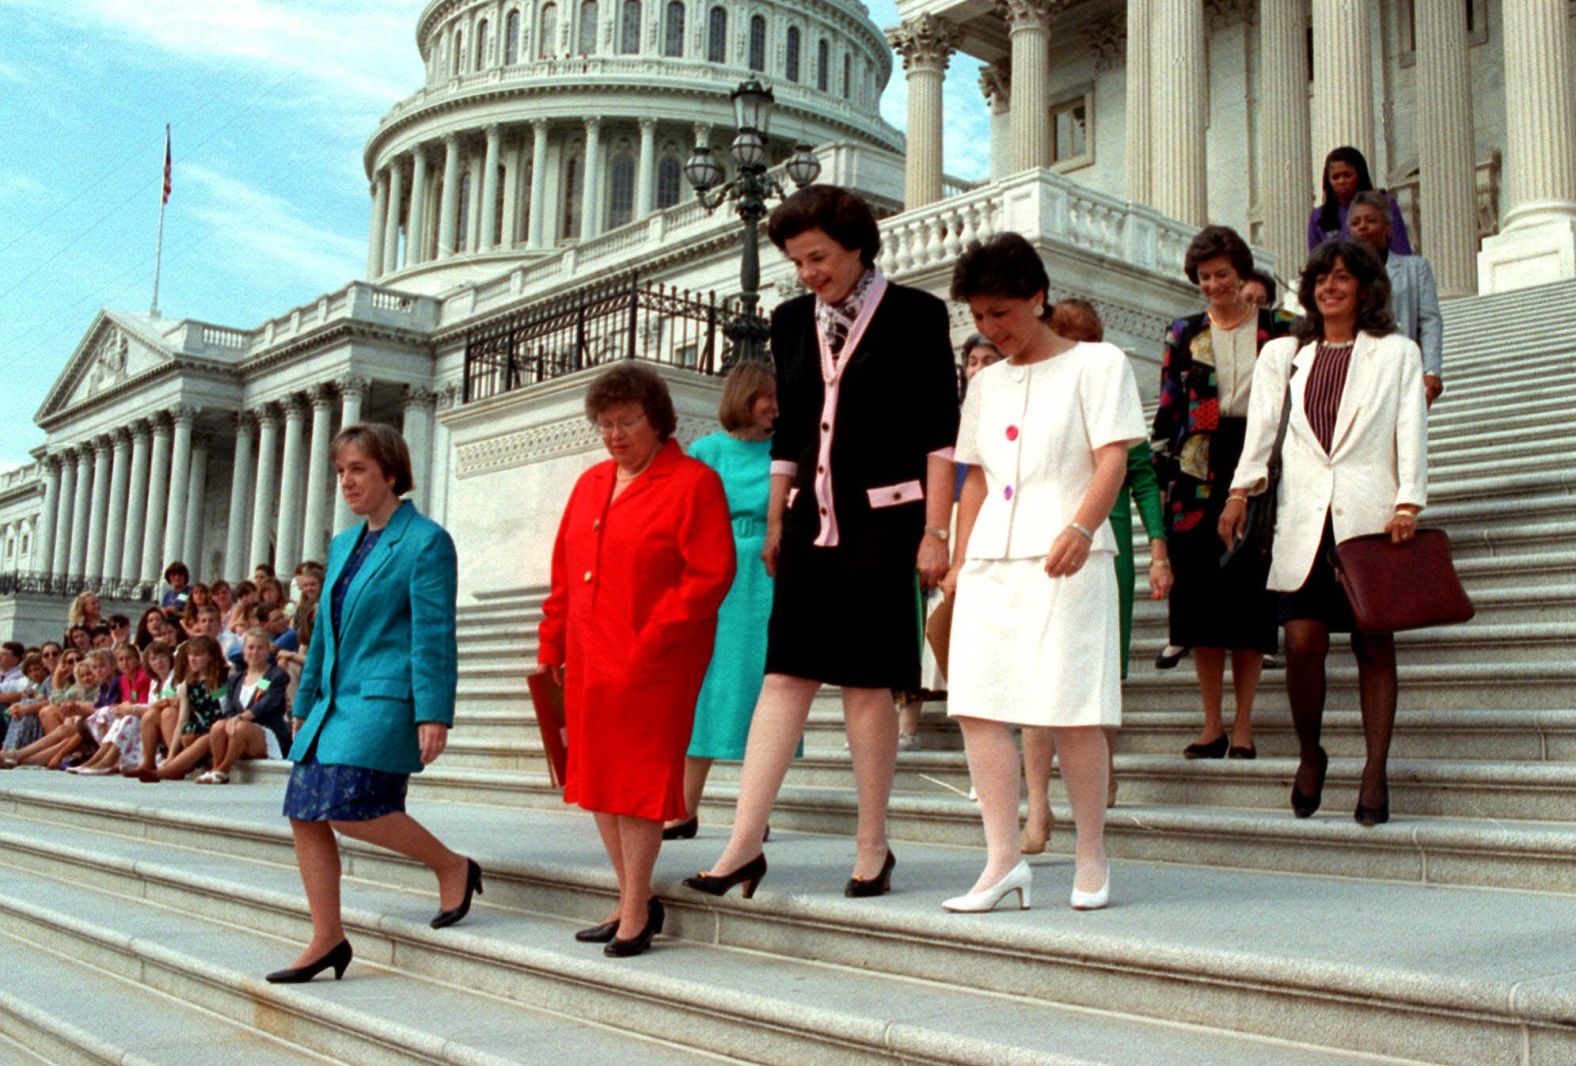 Feinstein joins a group of women senators and others on the steps of the Capitol to announce their opposition against restrictions on abortion coverage in federal appropriations bills in 1993.